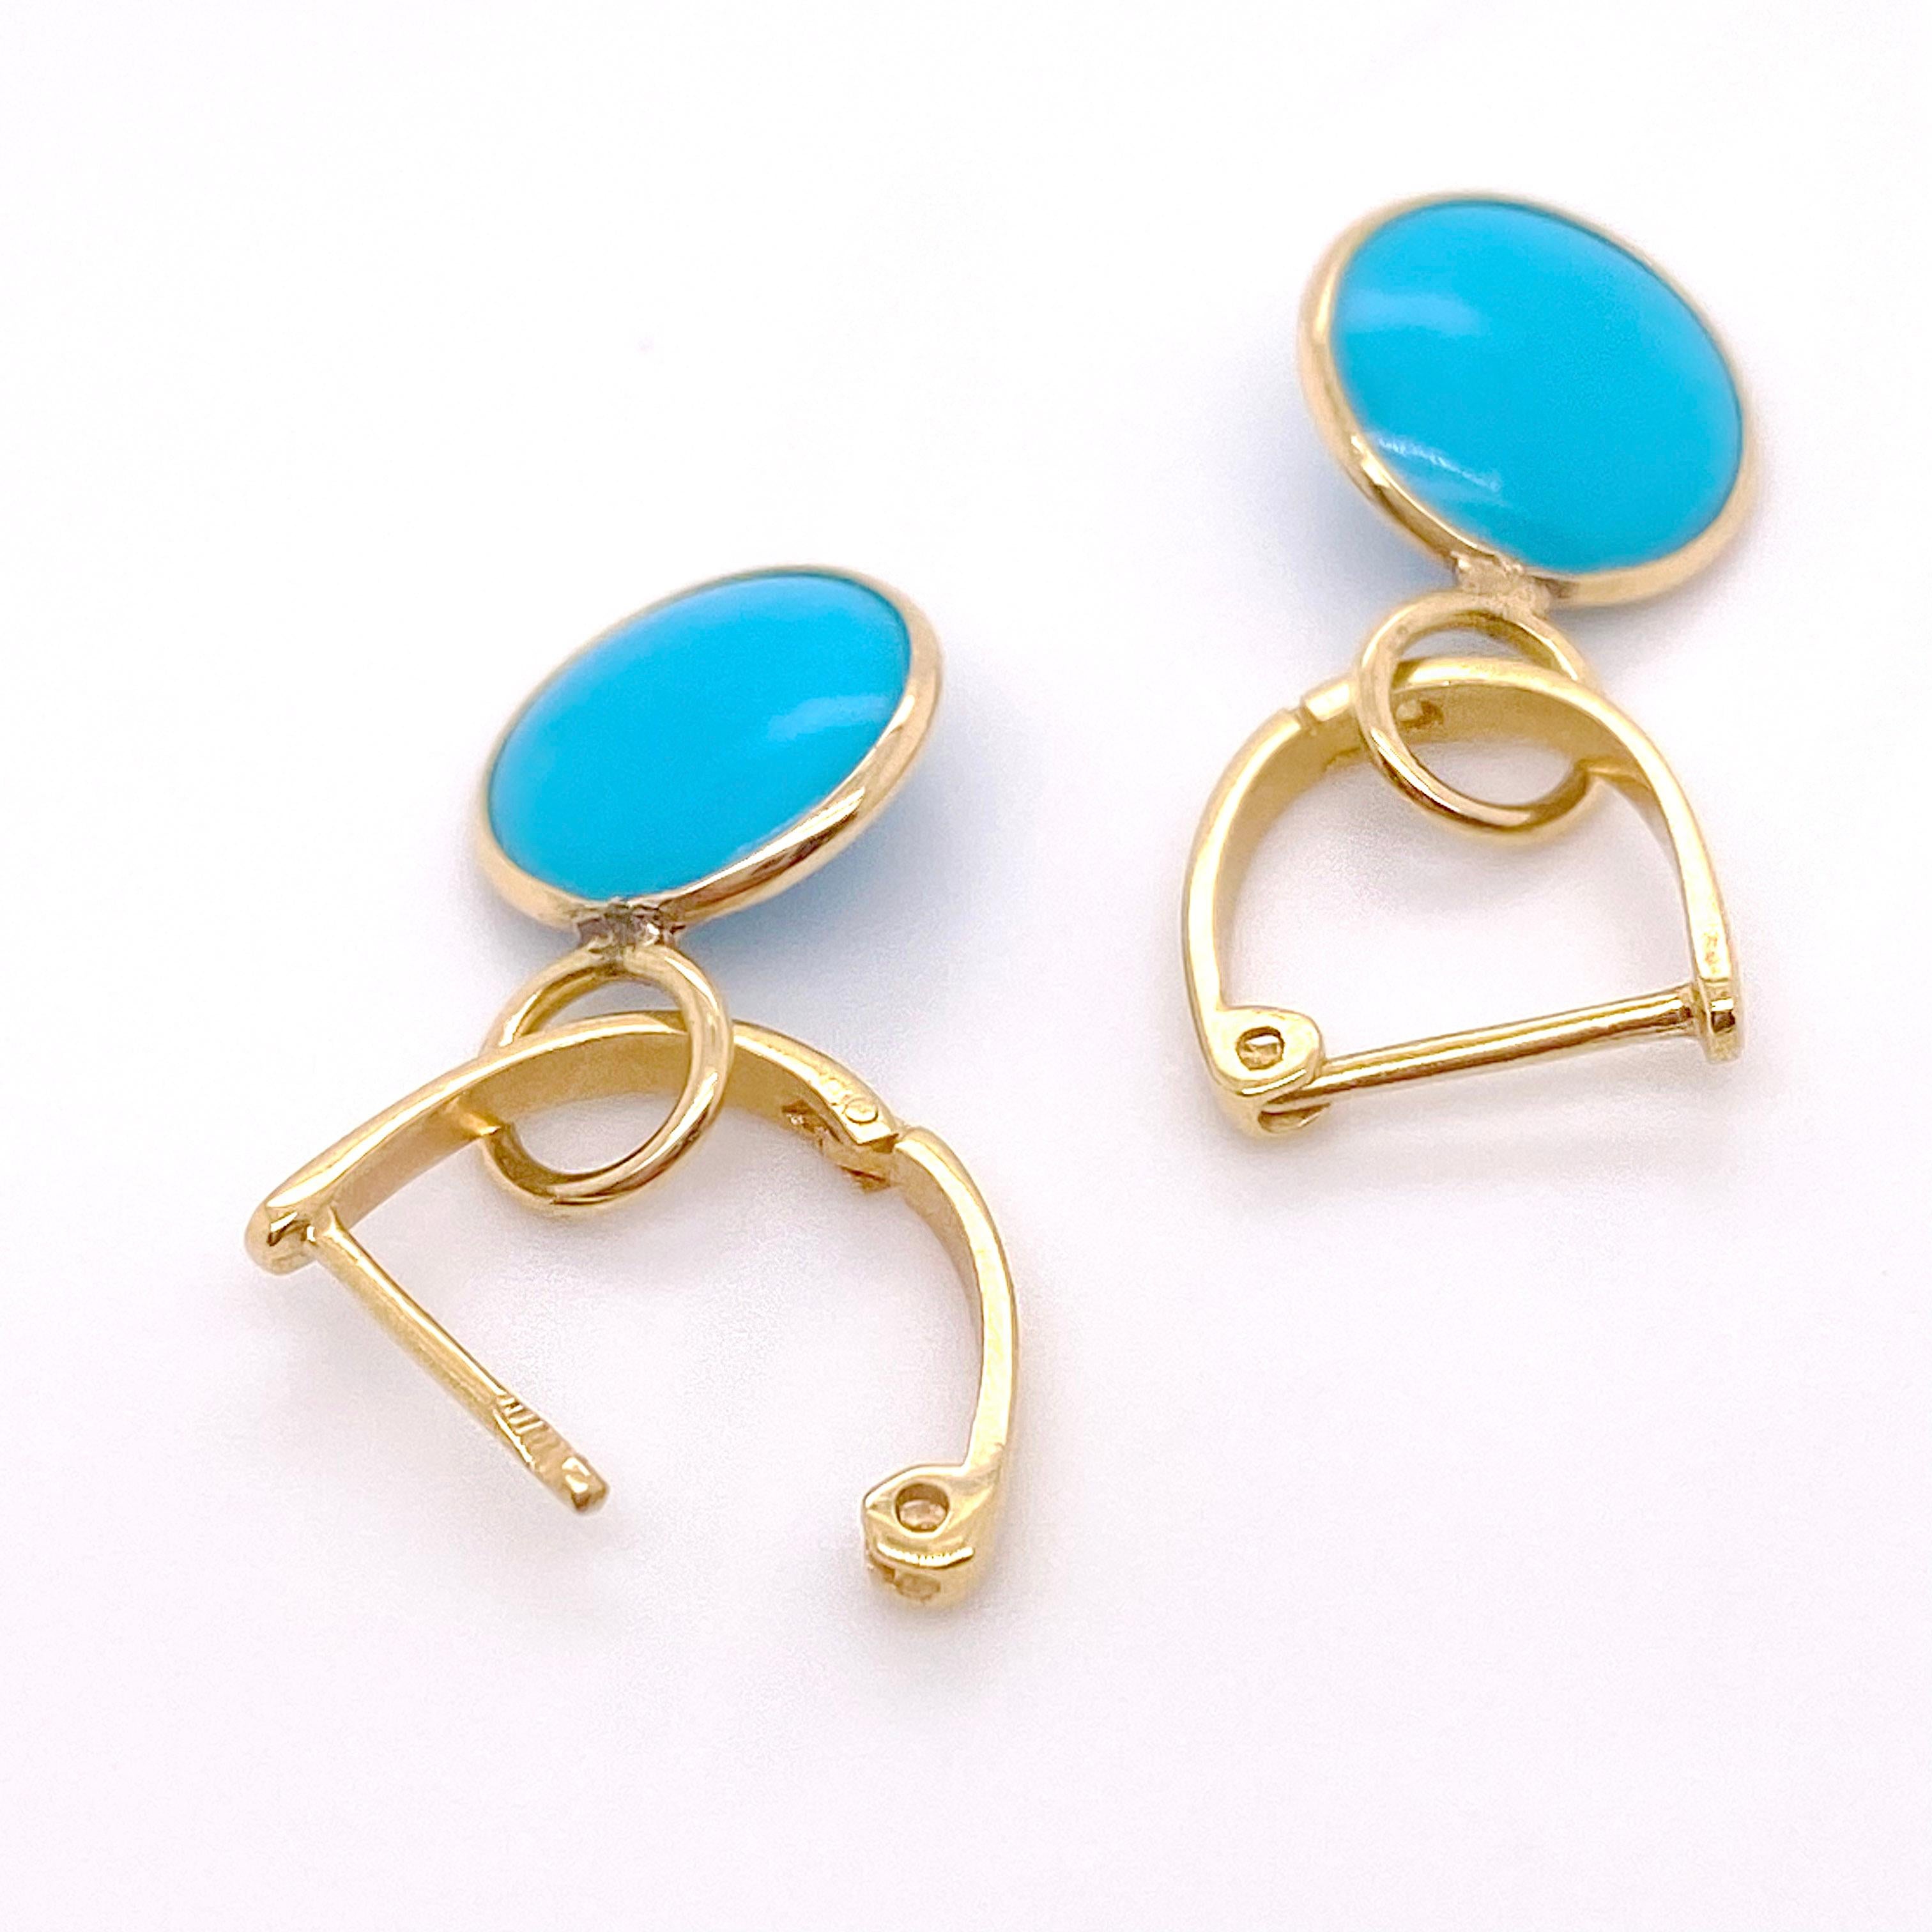 Round Cut Huggie Earrings, w Turquoise Charm, 18k Persian Turquoise Earrings 2.75 Carats